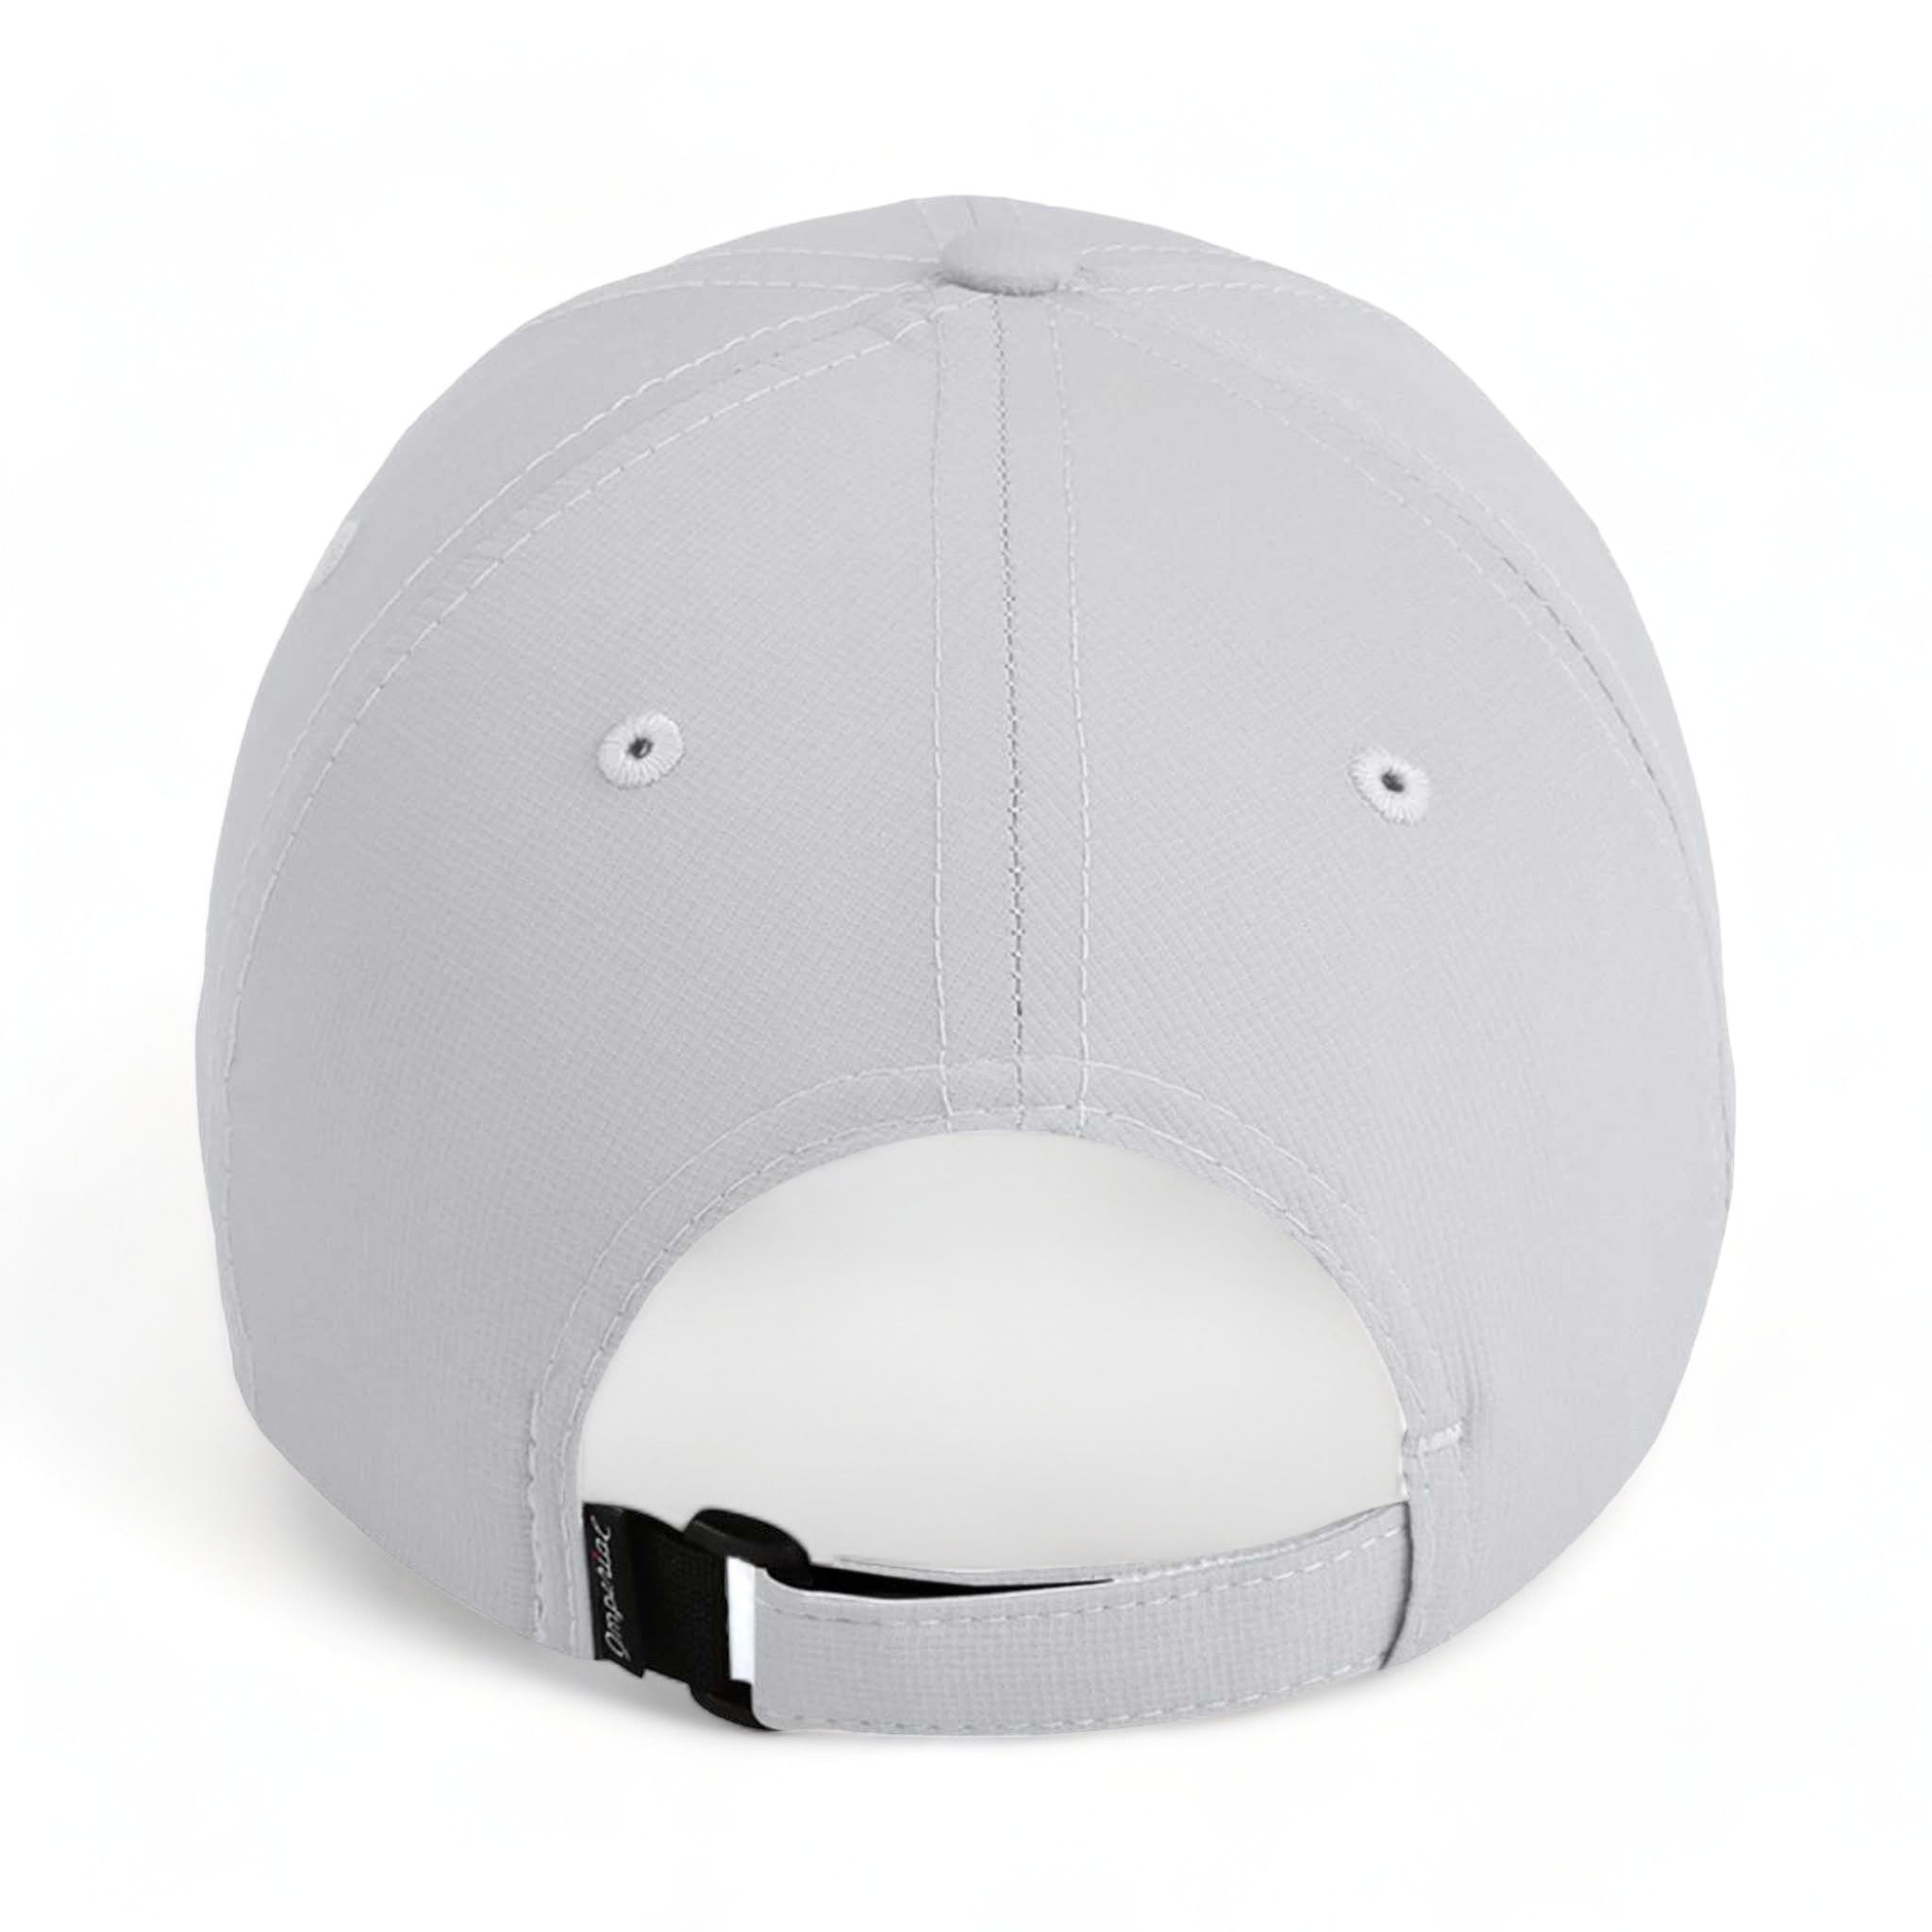 Back view of Imperial X210P custom hat in fog